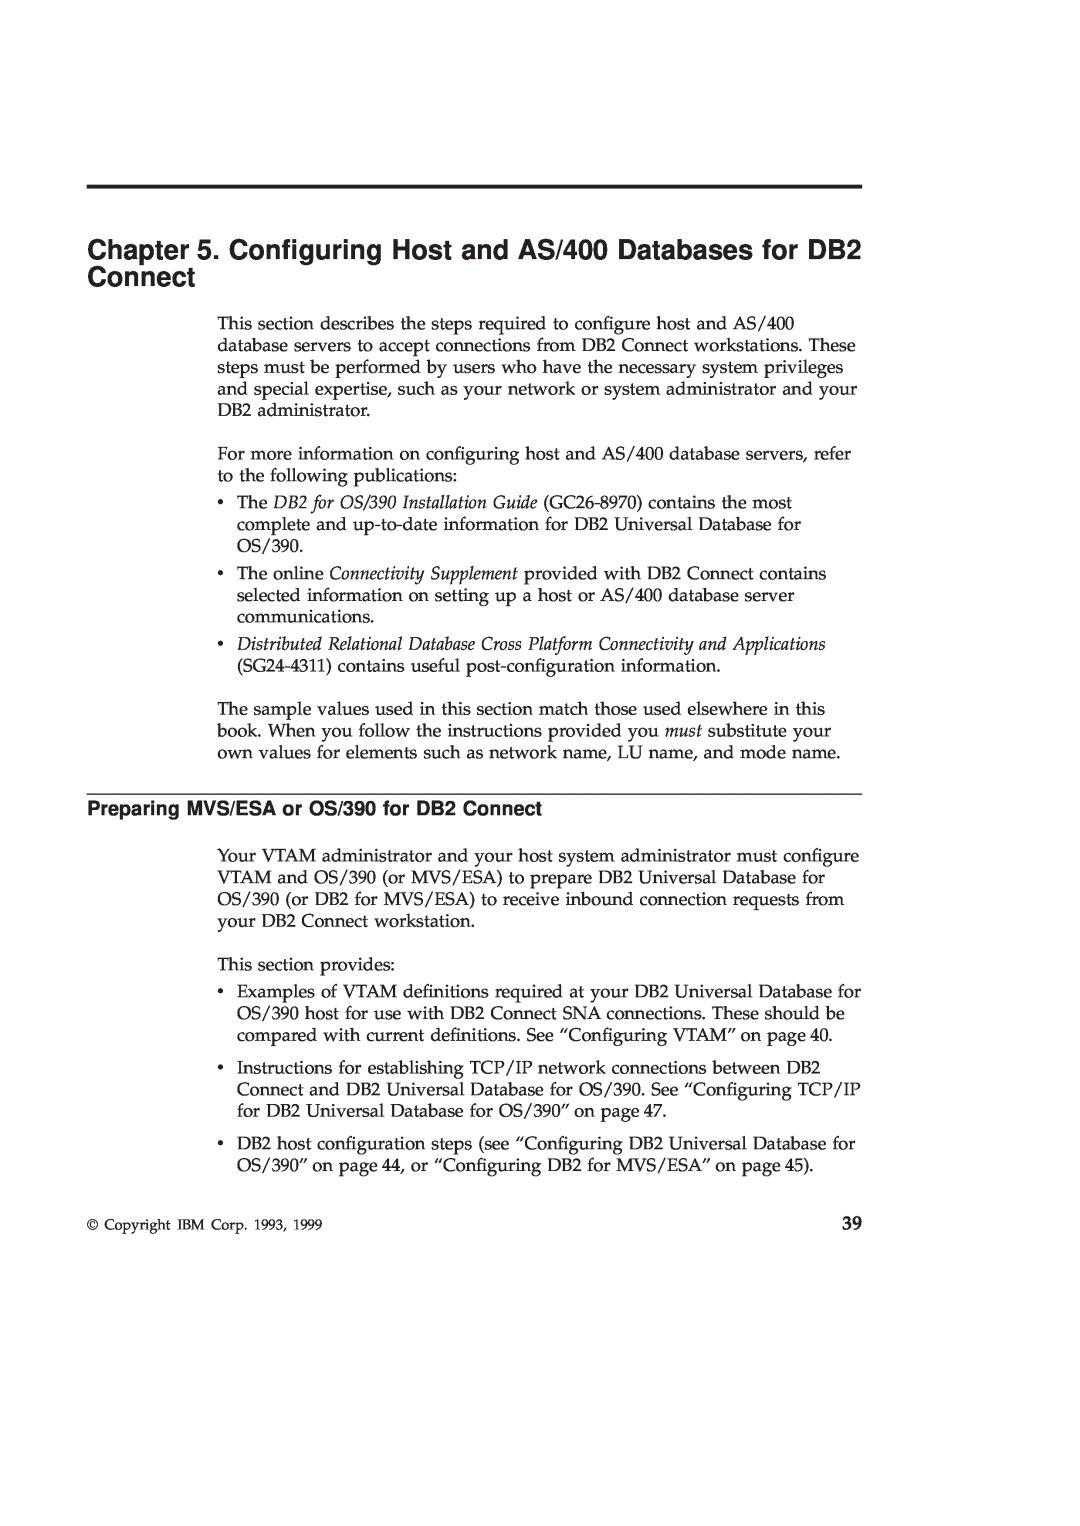 IBM GC09-2830-00 manual Conguring Host and AS/400 Databases for DB2 Connect, Preparing MVS/ESA or OS/390 for DB2 Connect 